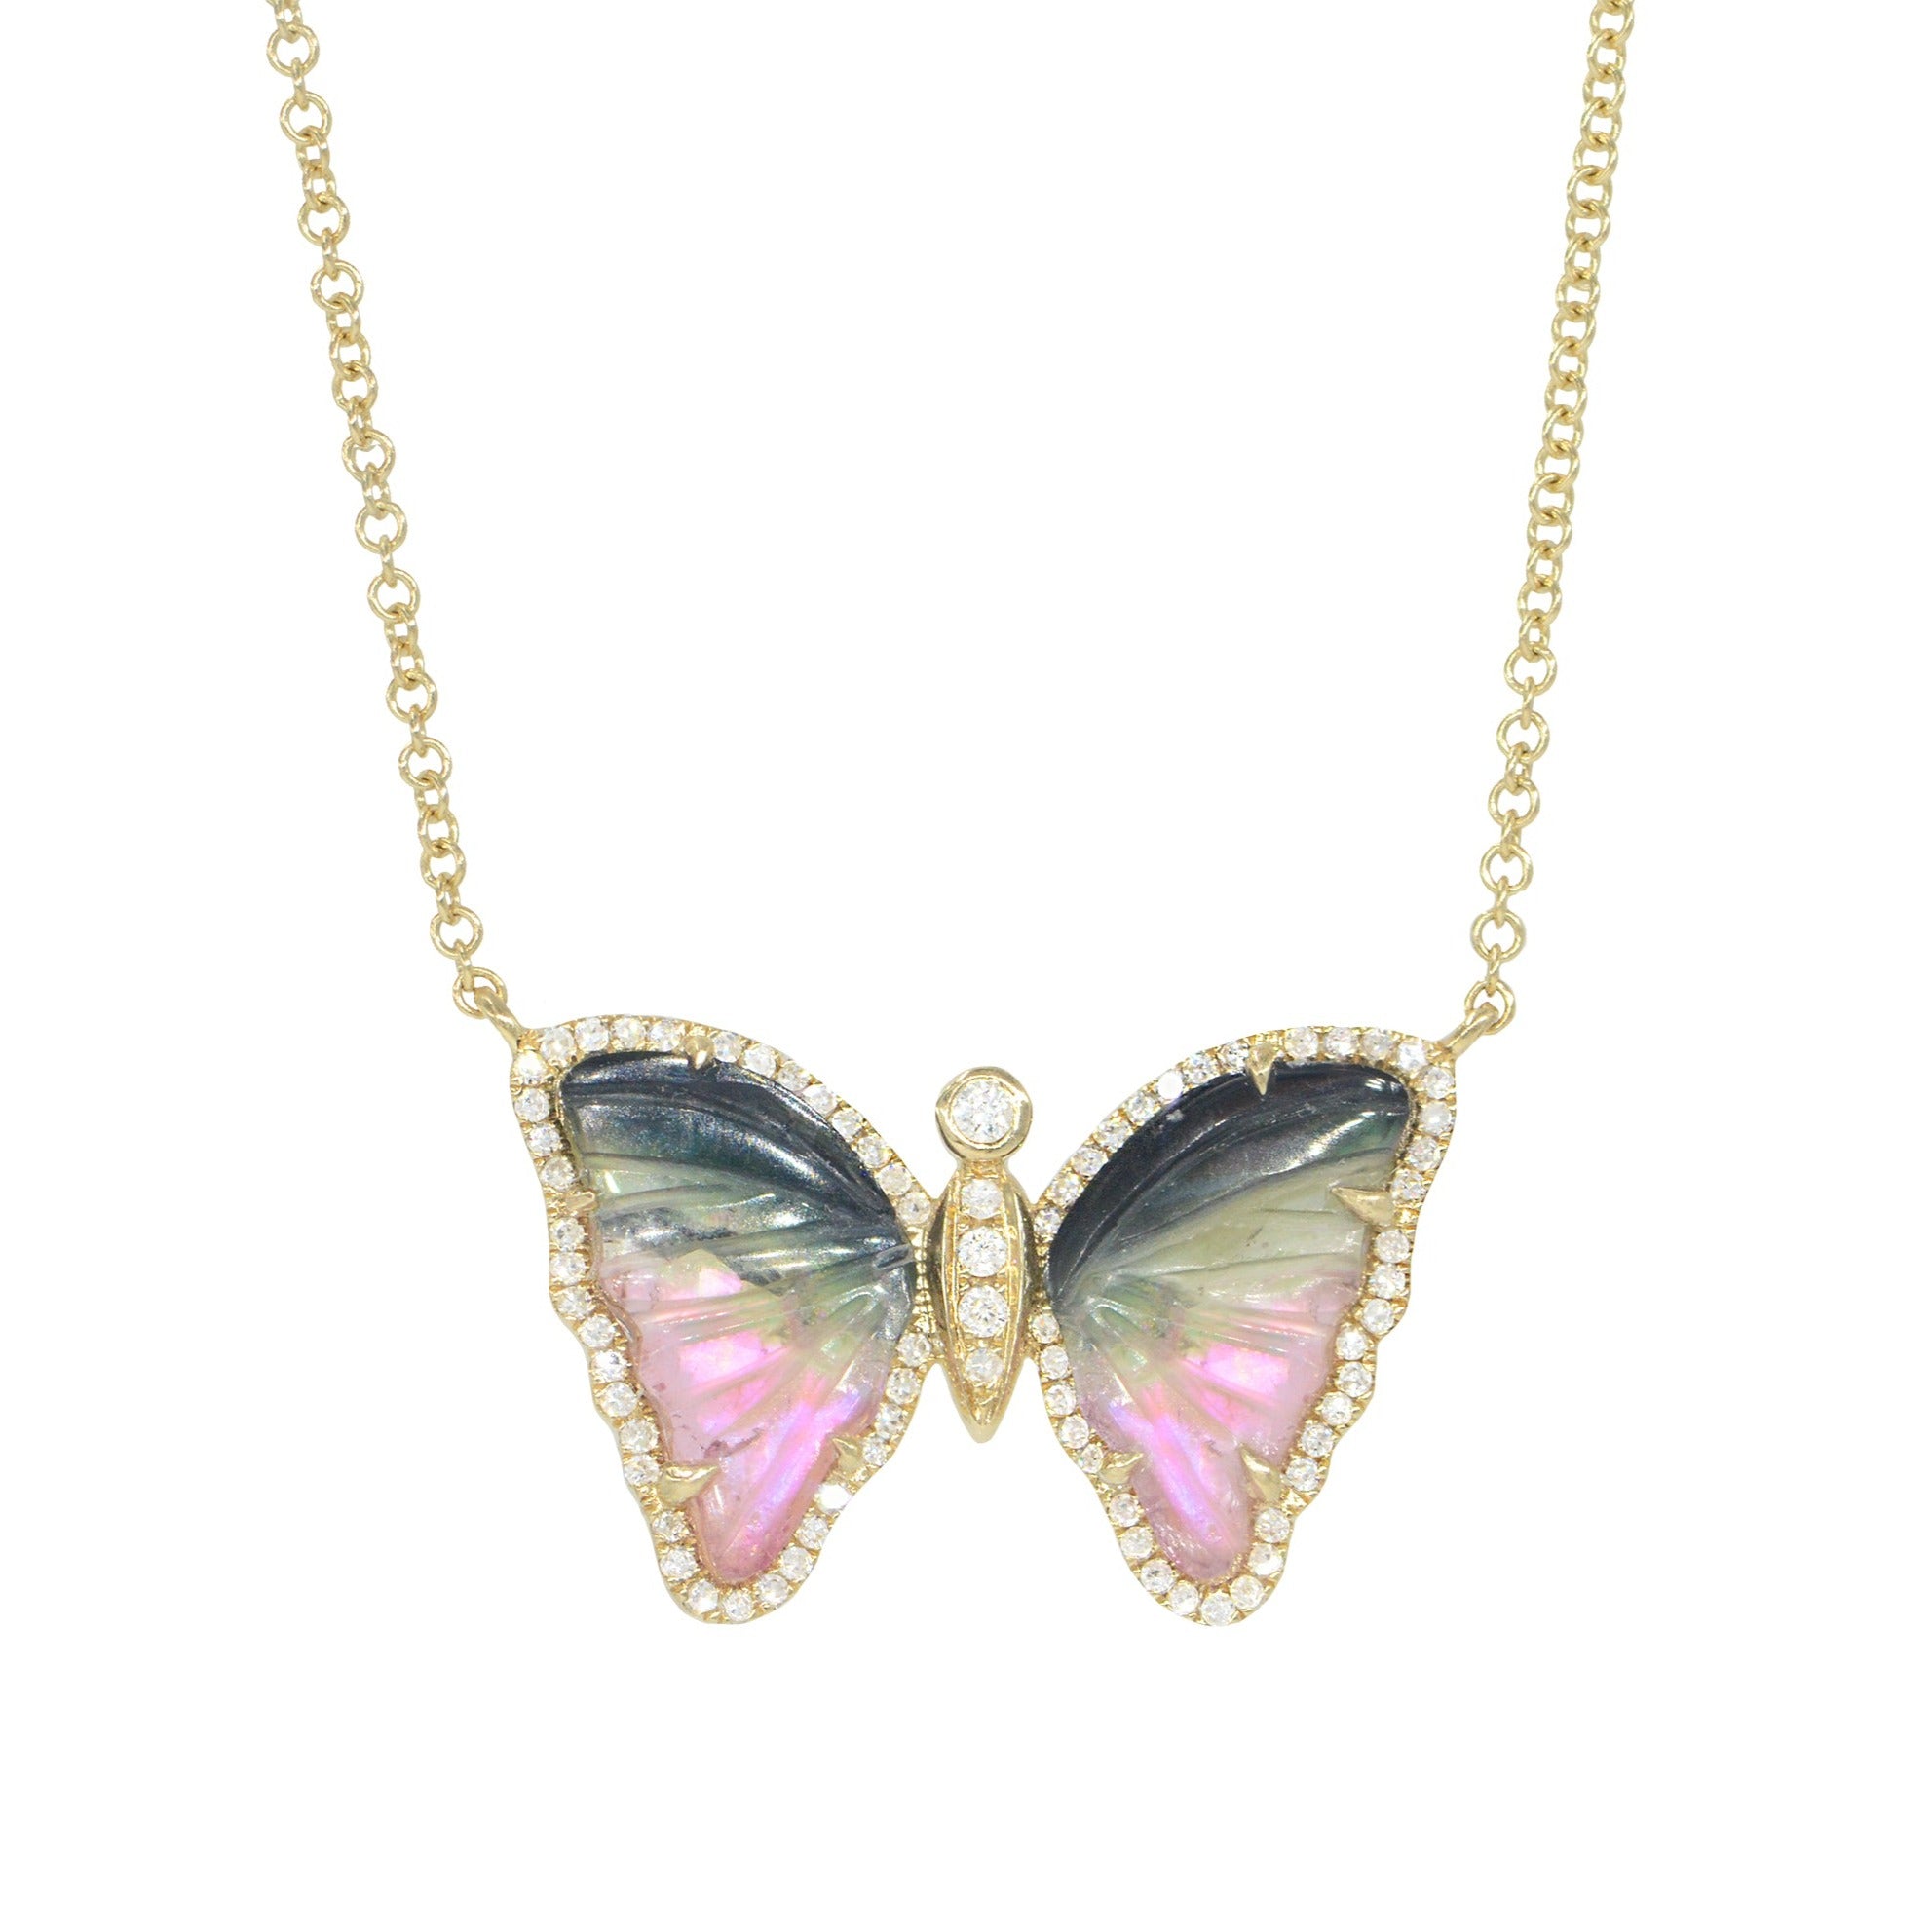 Pink and Black Tourmaline and Pearl Butterfly Necklace with Diamonds